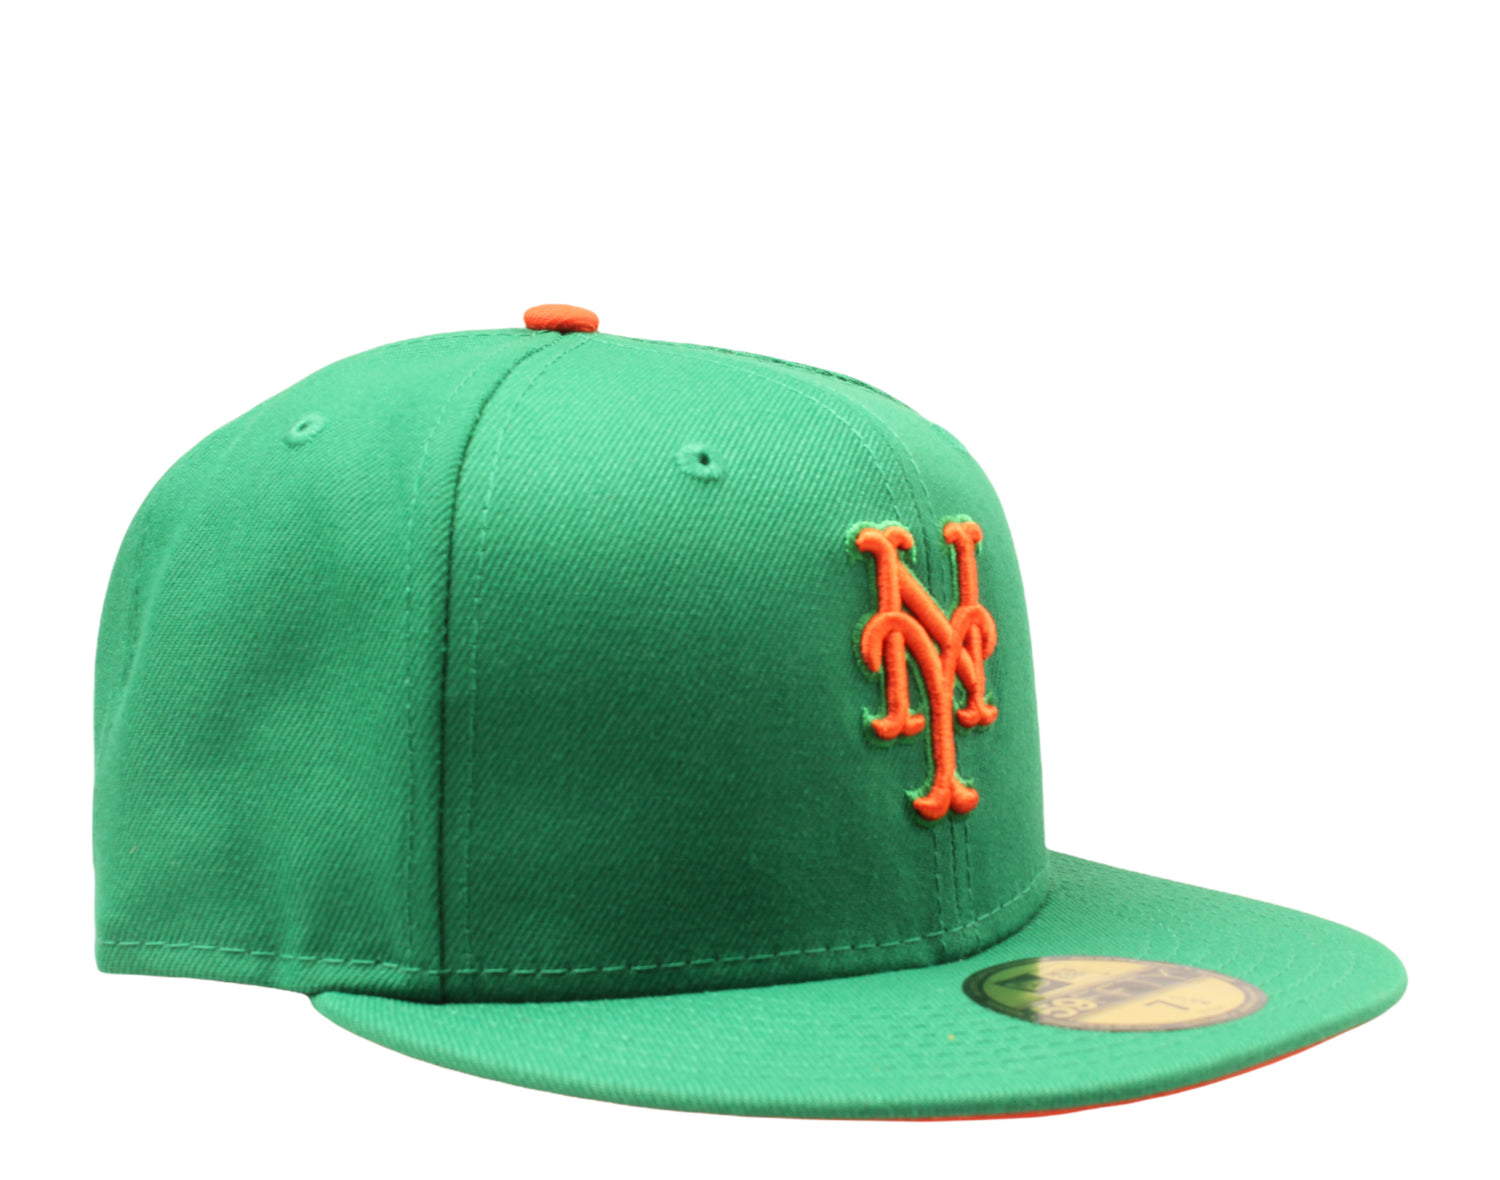 New Era x NYCMode 59Fifty MLB New York Mets Fitted Hat W/ Orange Undervisor